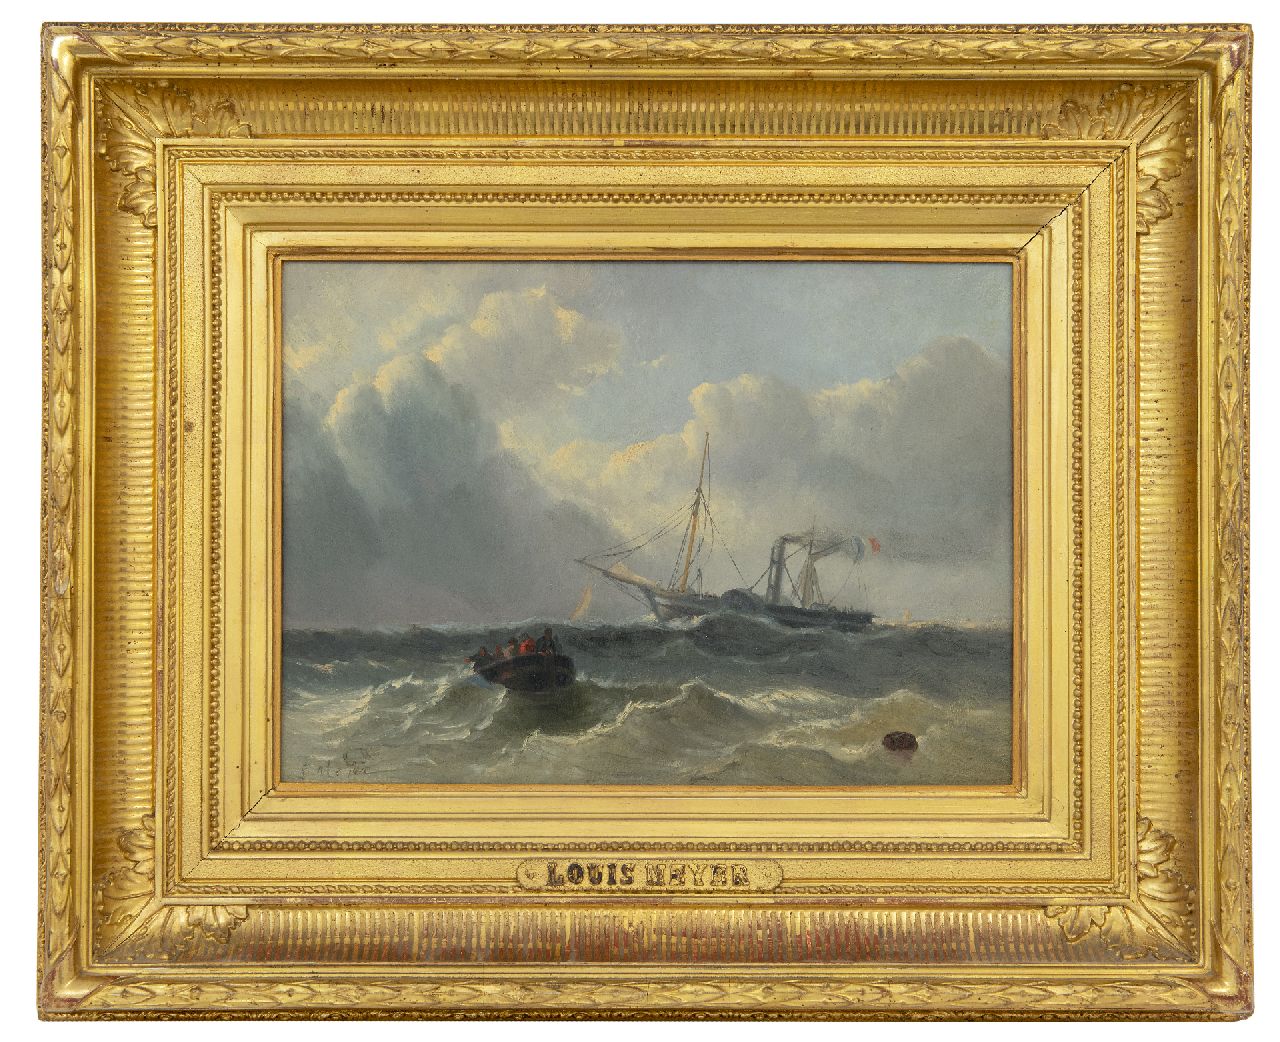 Meijer J.H.L.  | Johan Hendrik 'Louis' Meijer | Paintings offered for sale | A steamer and French paddle steamer at sea, oil on panel 24.5 x 33.5 cm, signed l.l.